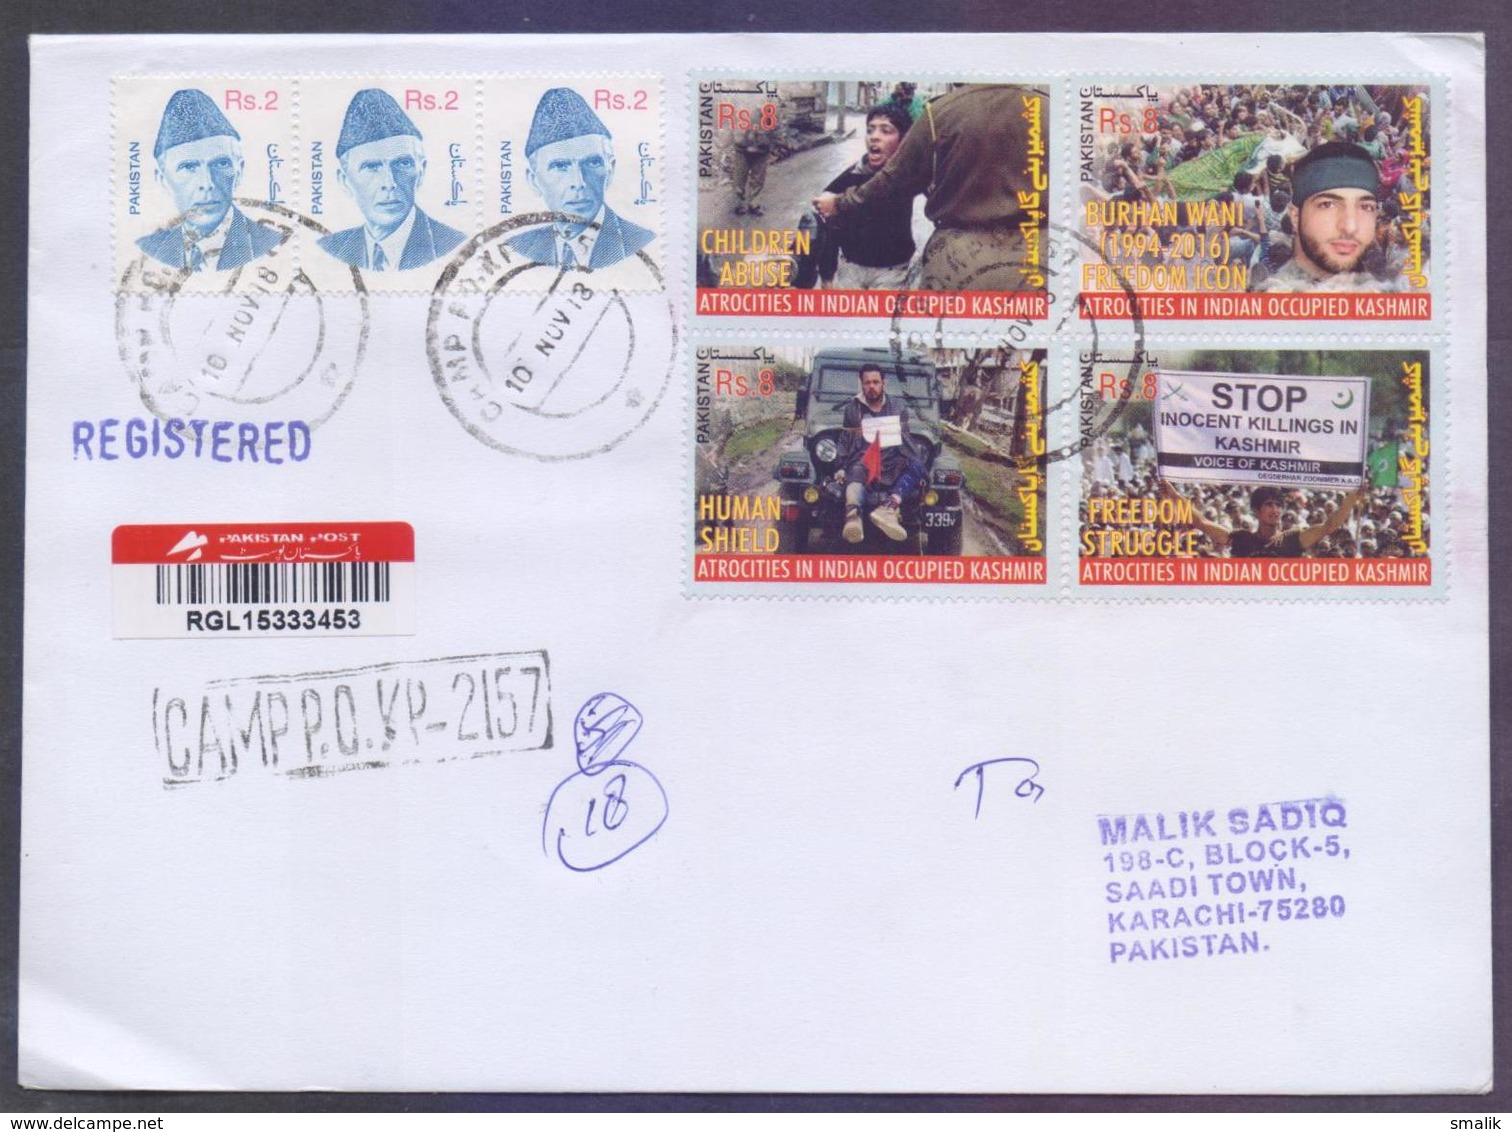 PAKISTAN 2018 - ATROCITIES IN INDIAN OCCUPIED KASHMIR, Registered Postal Used Cover - Pakistan